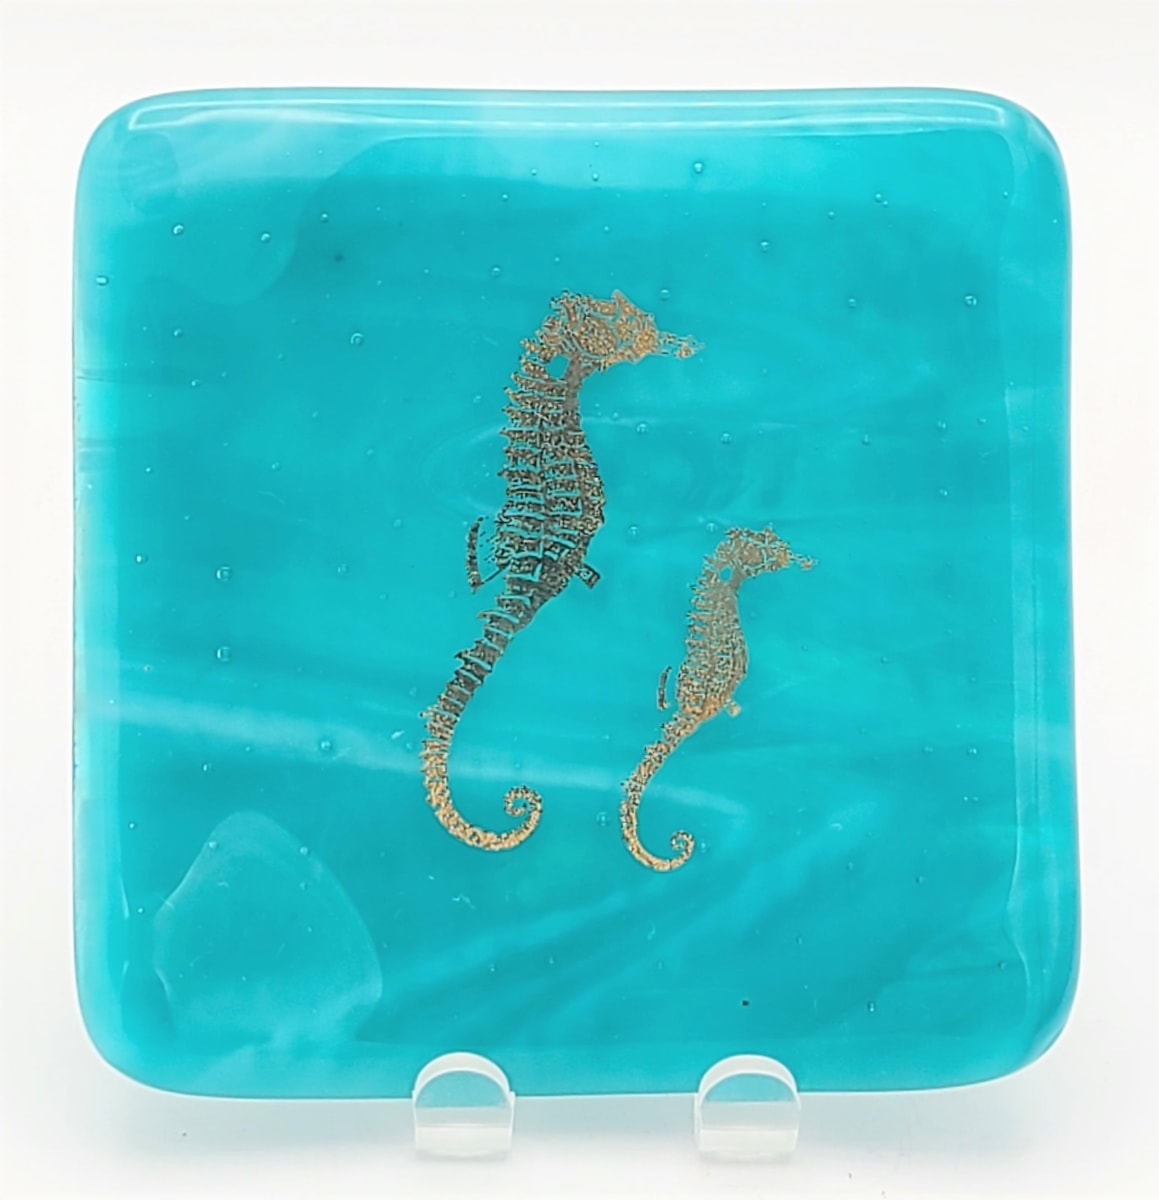 Small Plate-Peacock Streaky with Gold Seahorses by Kathy Kollenburn 